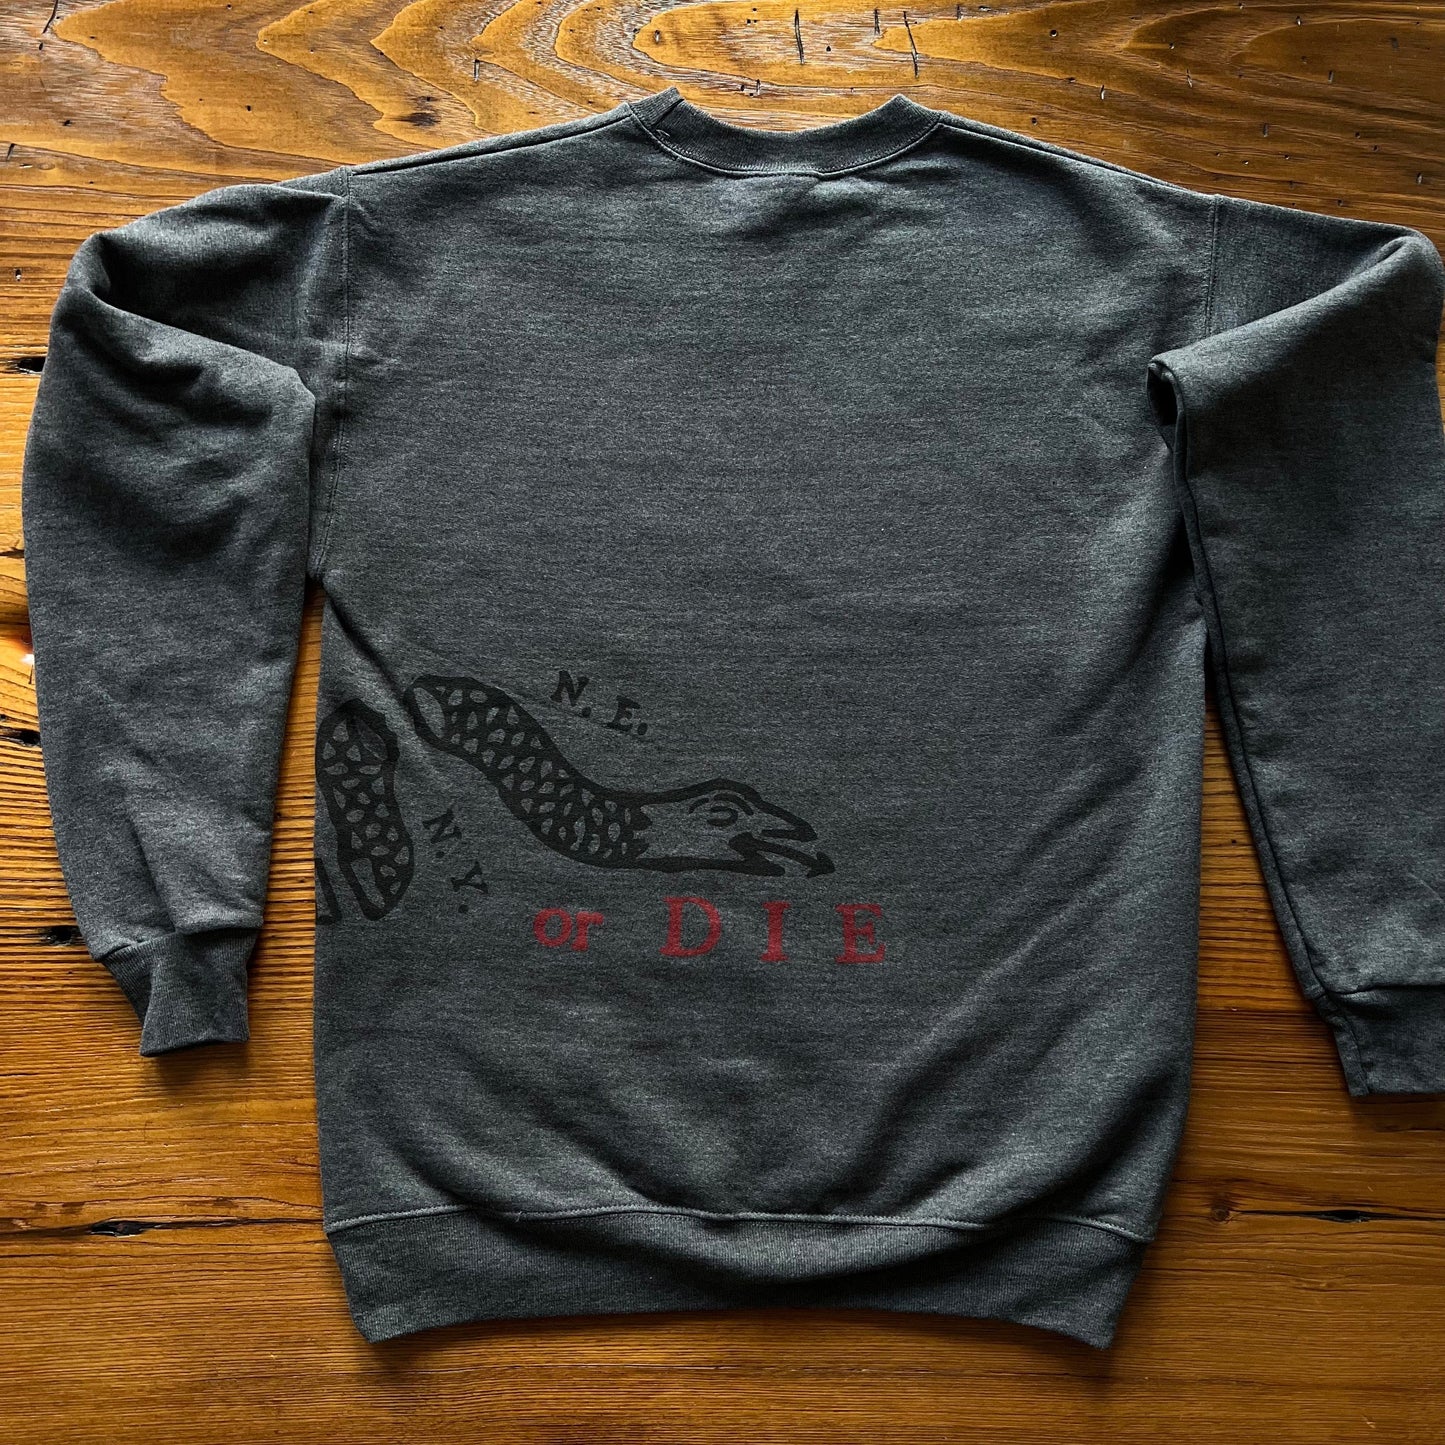 Back of "Join or Die" Crewneck sweatshirt from the history list store